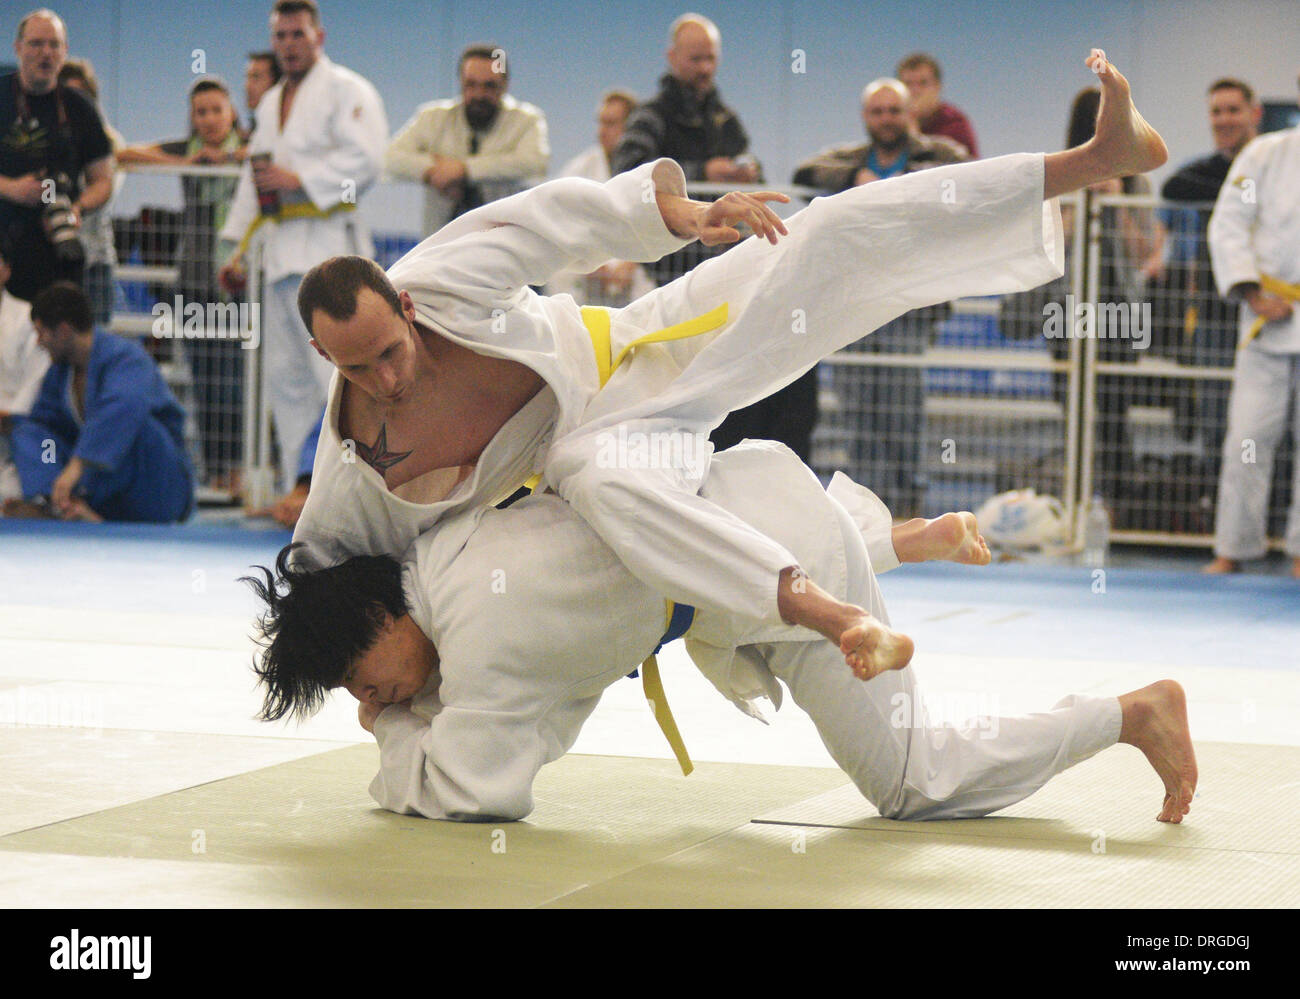 Richmond, Canada. 26th Jan, 2014. Jordan Harris of Canada (top) competes with compatriot Victor Chen at the 2014 Vancouver International Judo Tournament in Richmond, Canada, Jan. 25, 2014. © Sergei Bachlakov/Xinhua/Alamy Live News Stock Photo